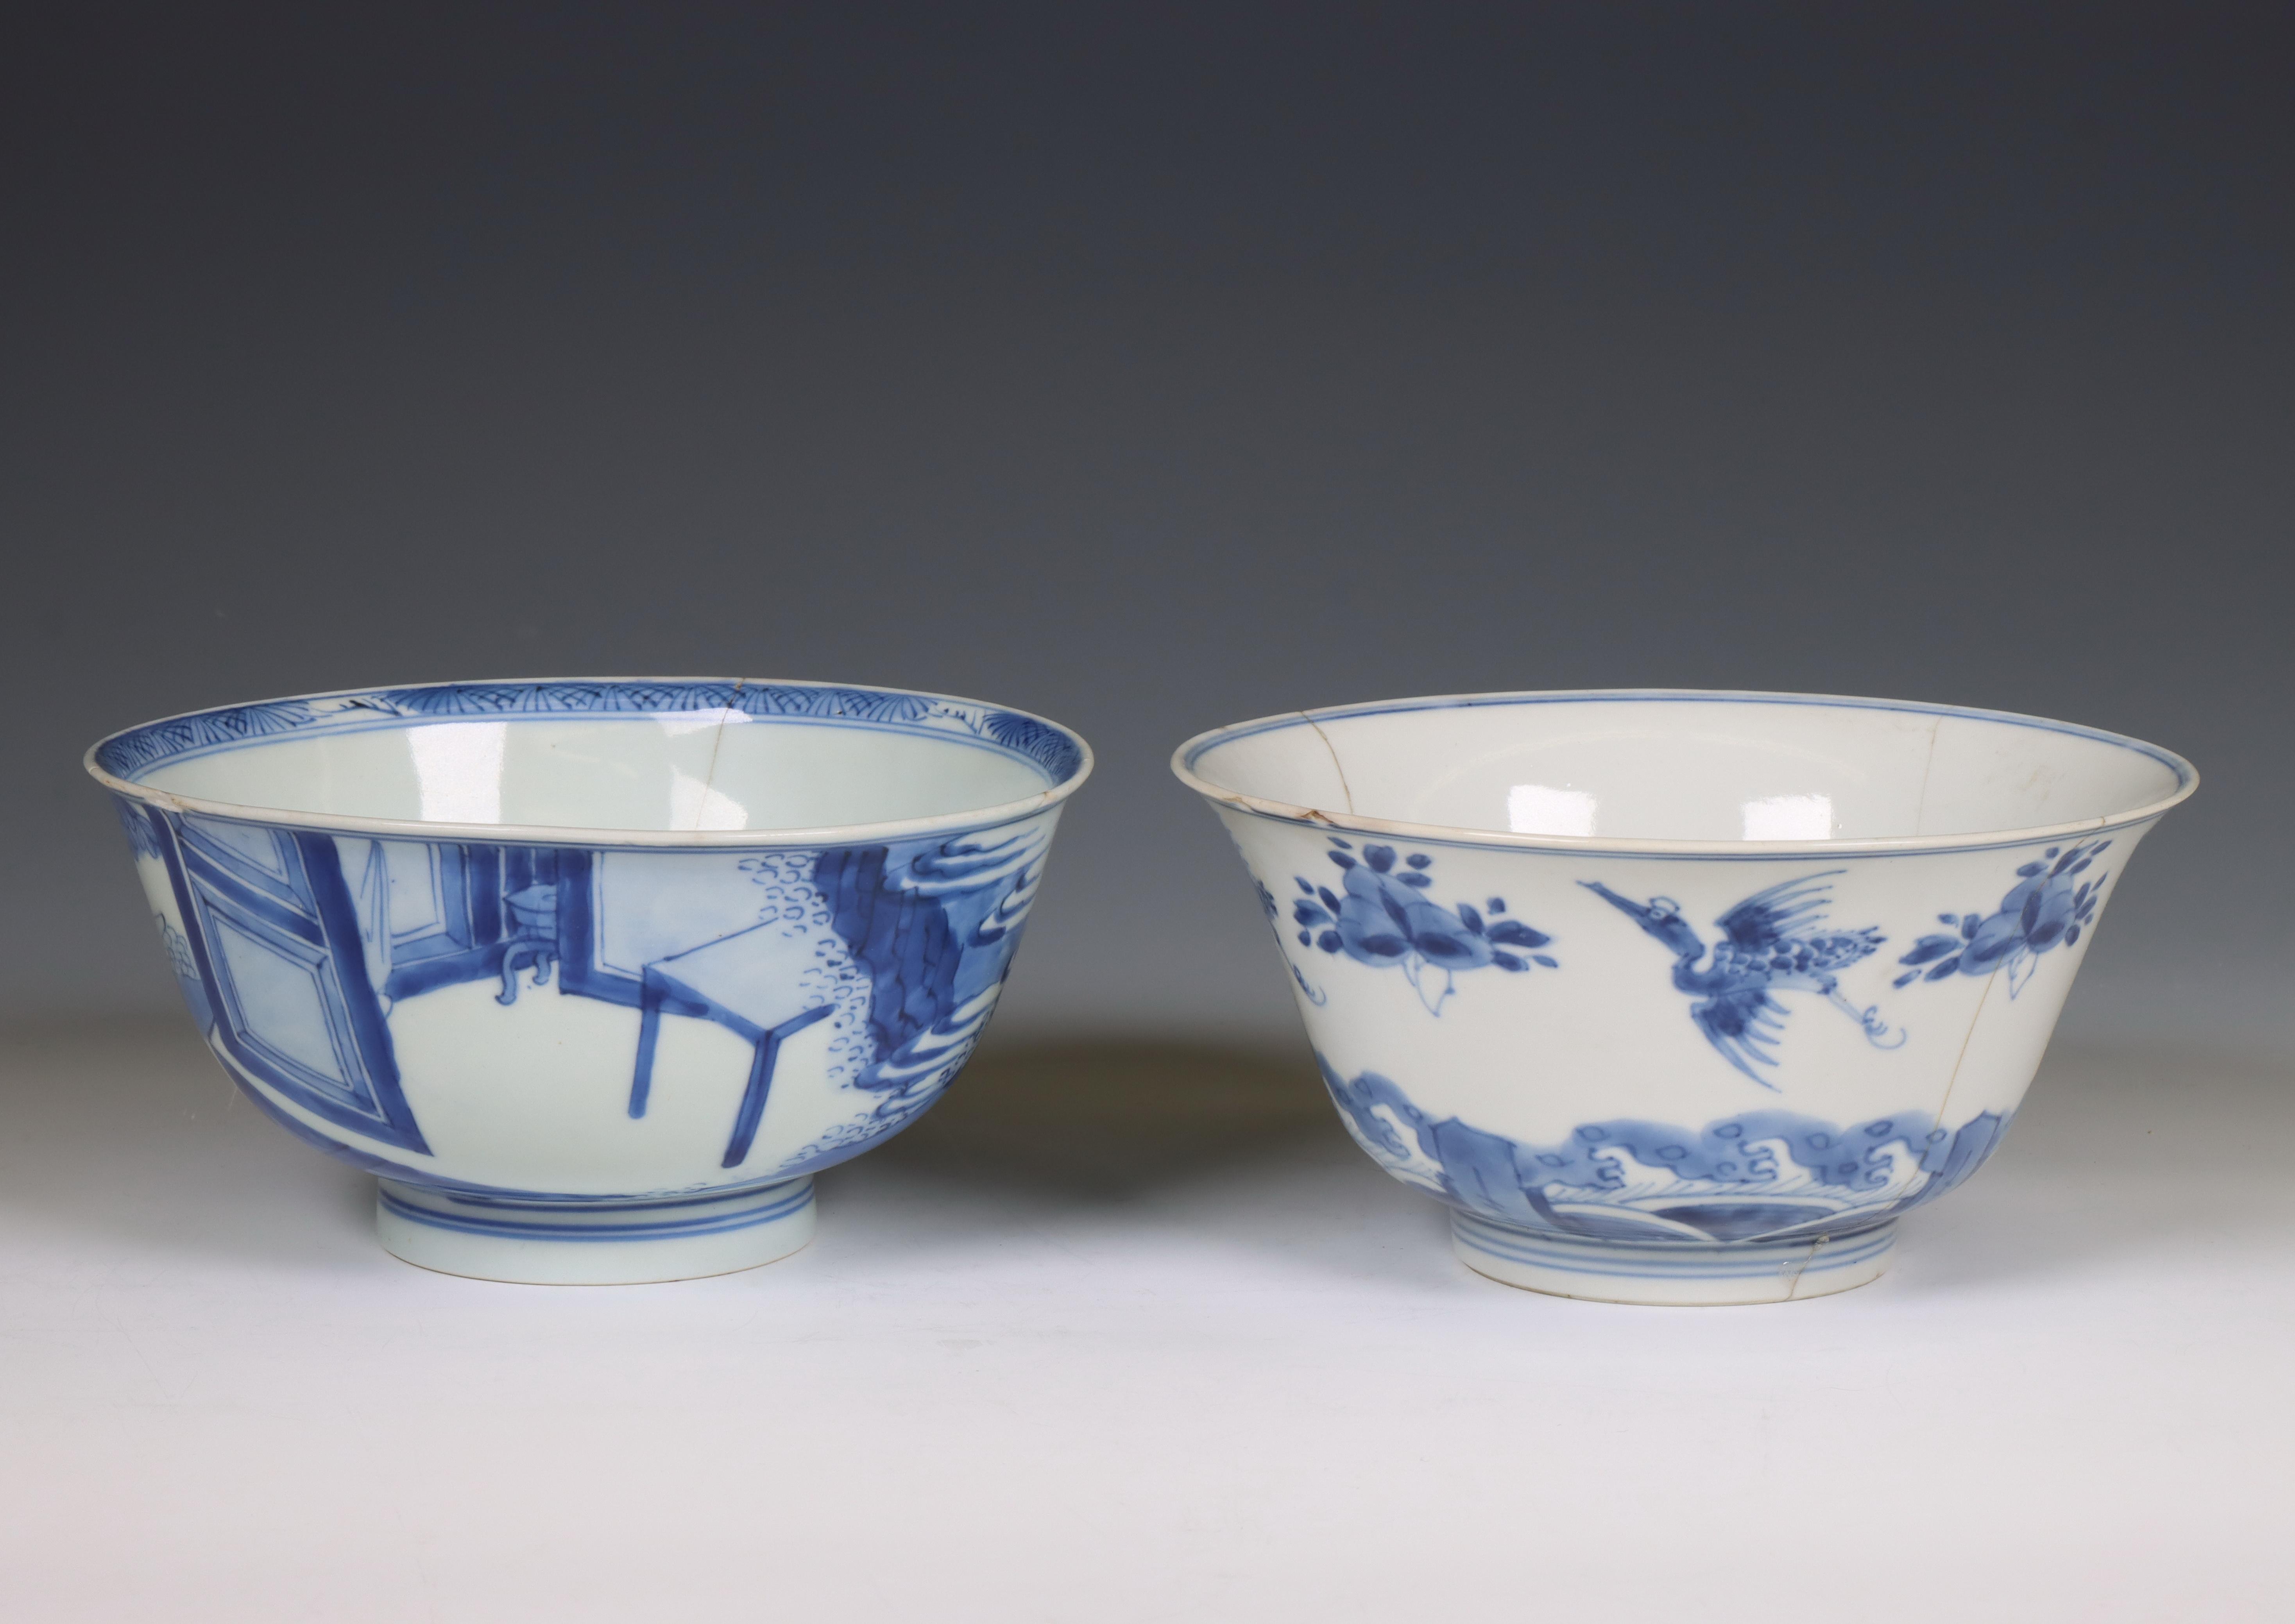 China, two blue and white porcelain bowls, Kangxi period (1662-1722), - Image 5 of 5